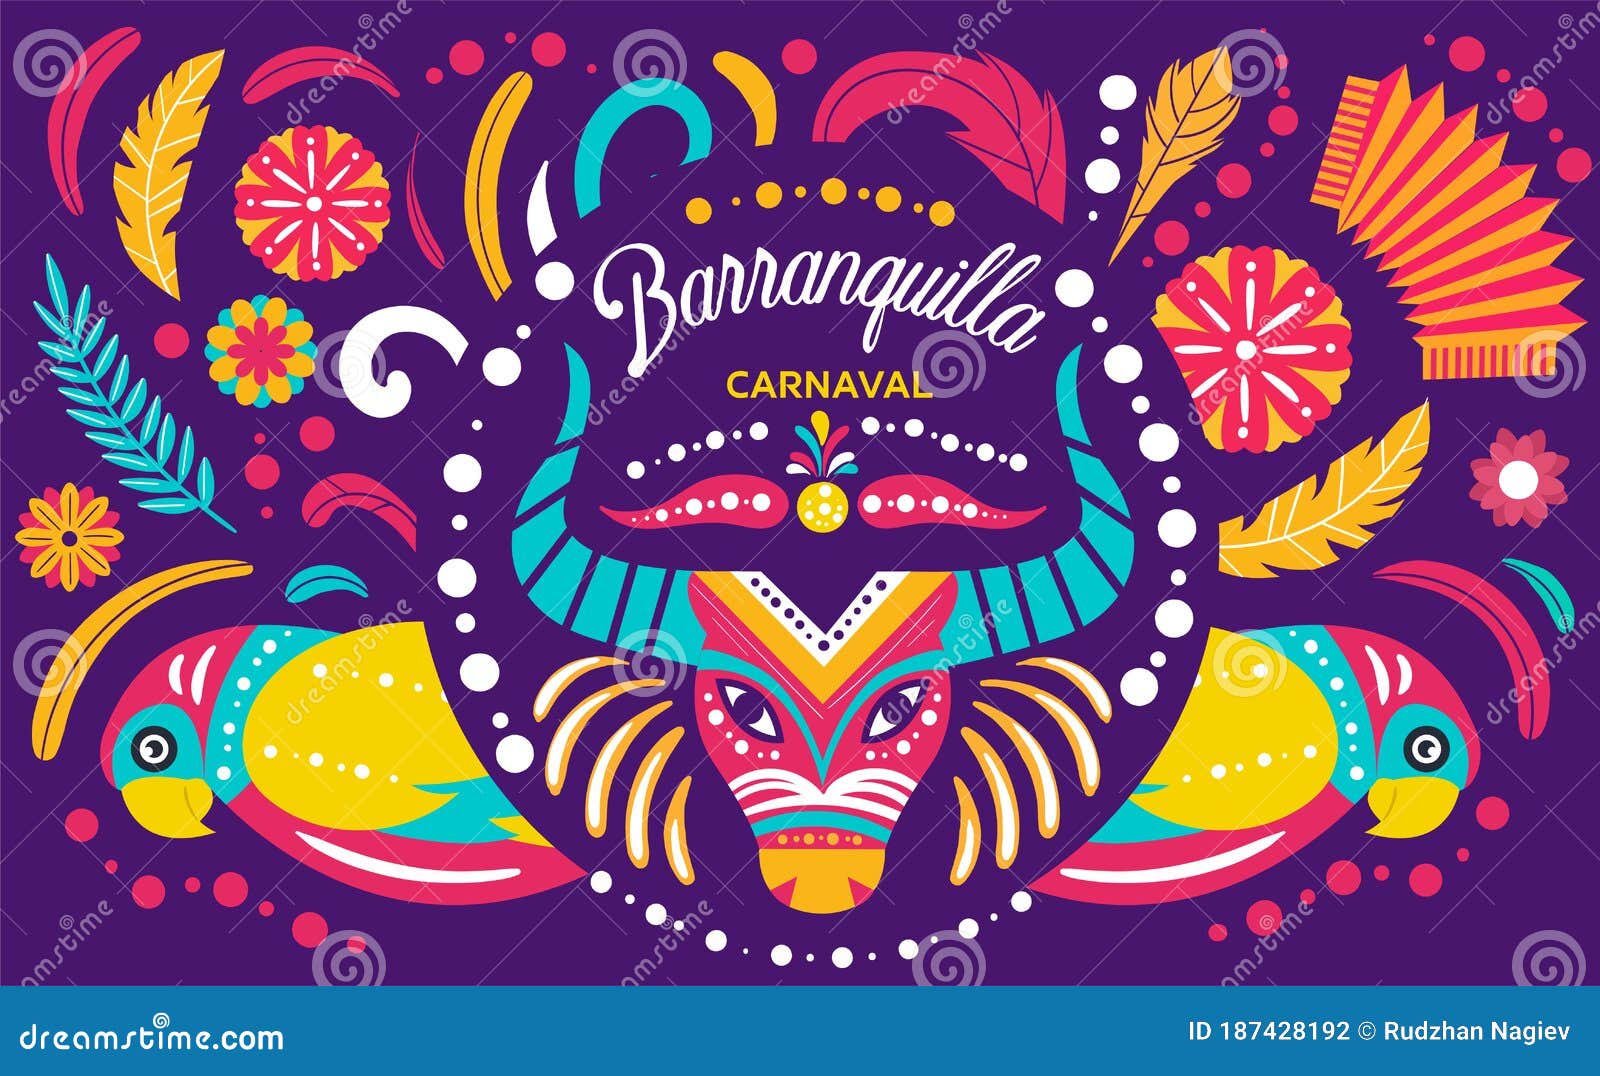 colorful poster of colombian barranquilla carnival